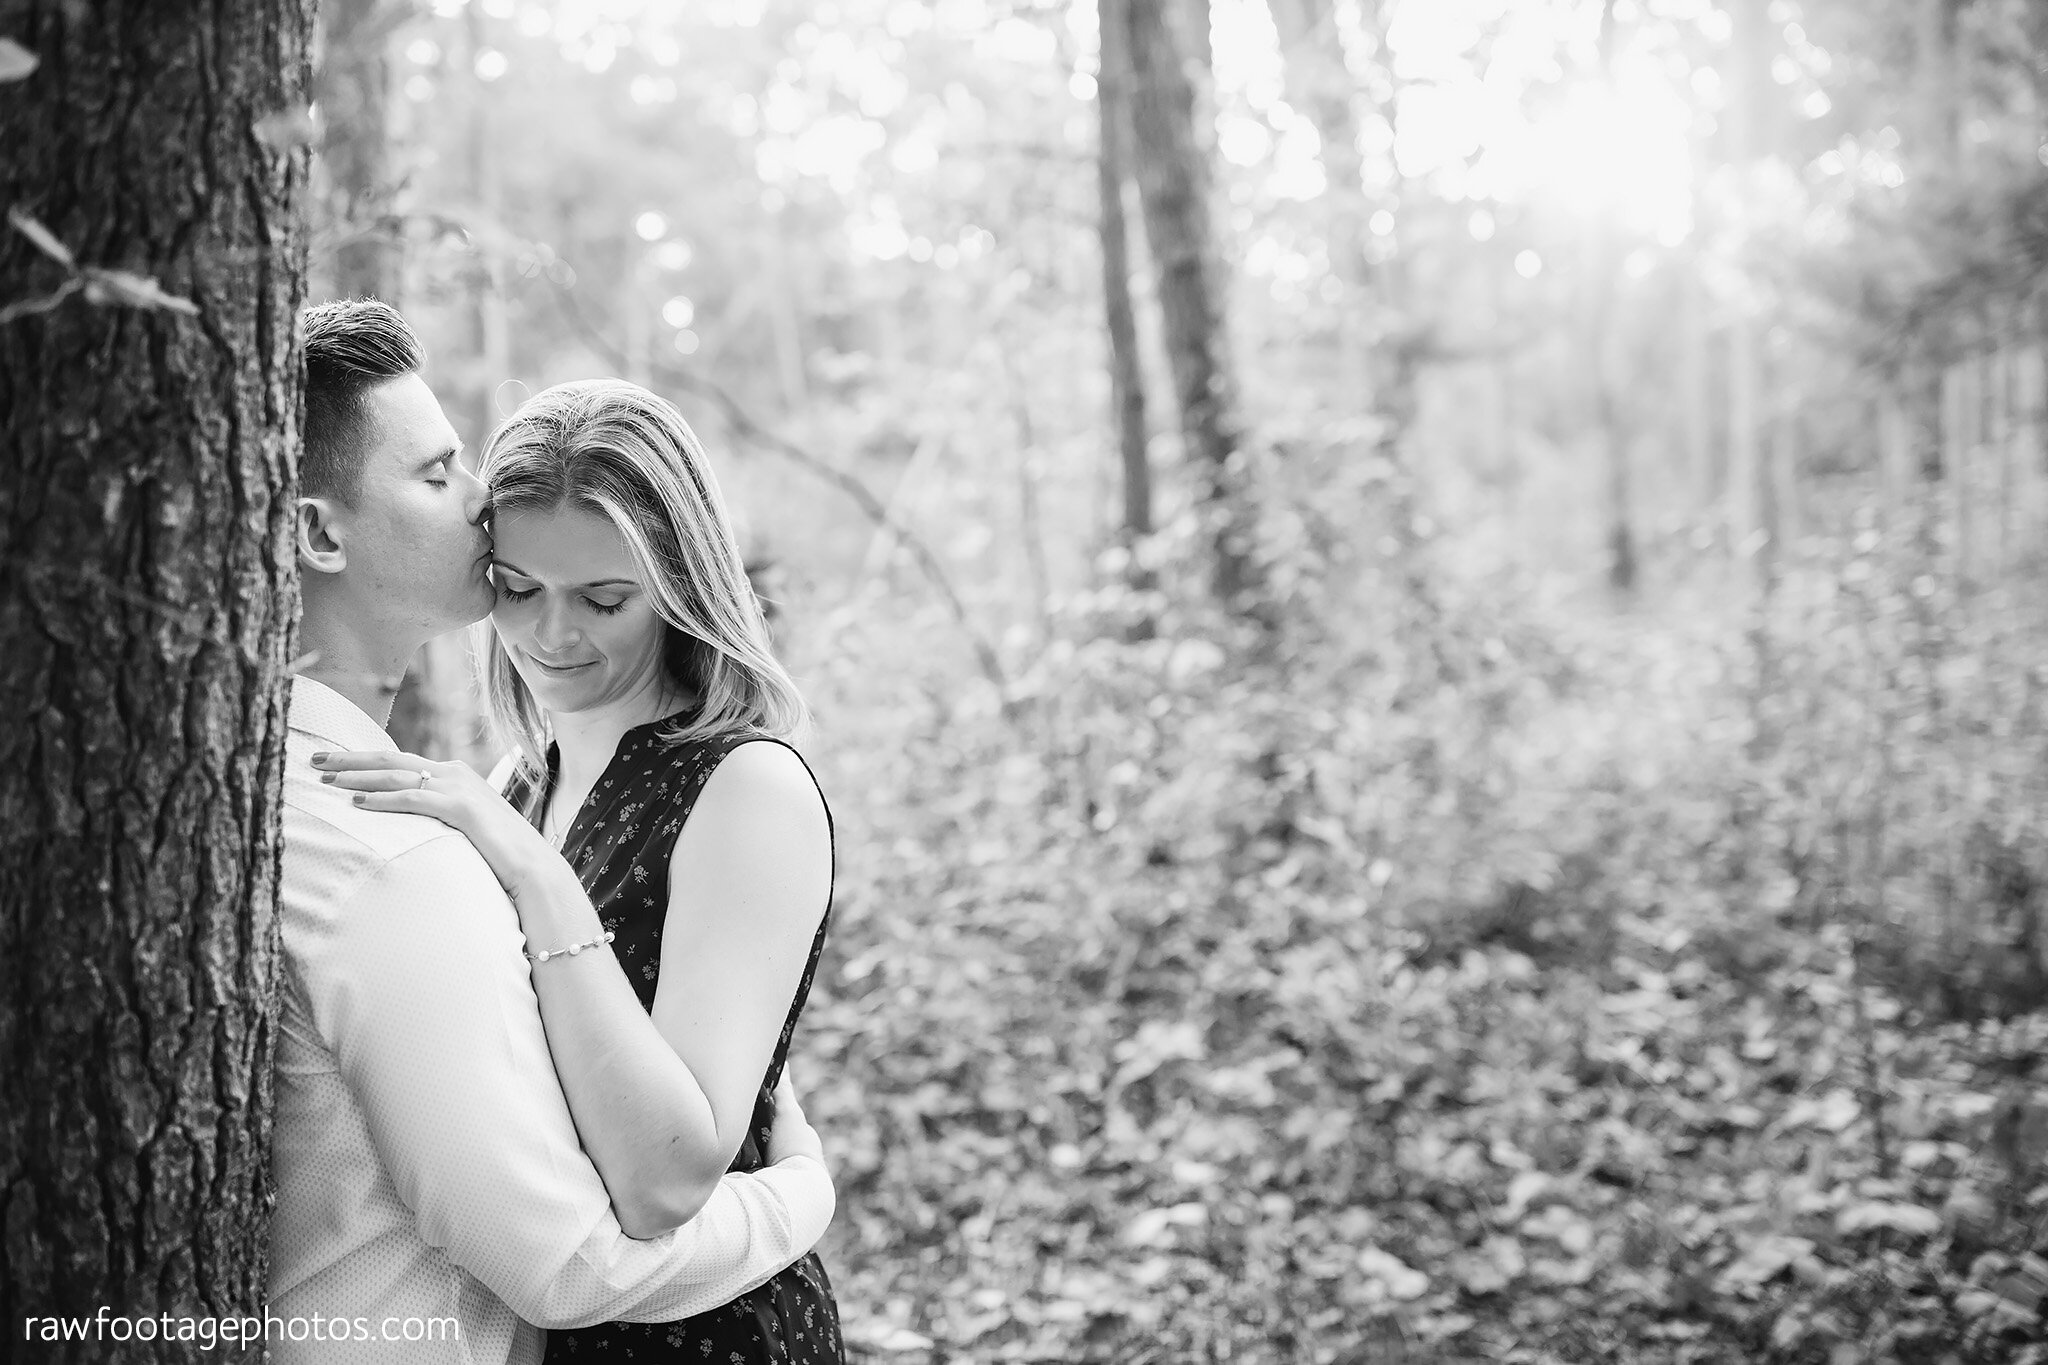 london_ontario_wedding_photographer-grand_bend_engagement_session-beach_engagement-sunset-forest-woods-raw_footage_photography008.jpg